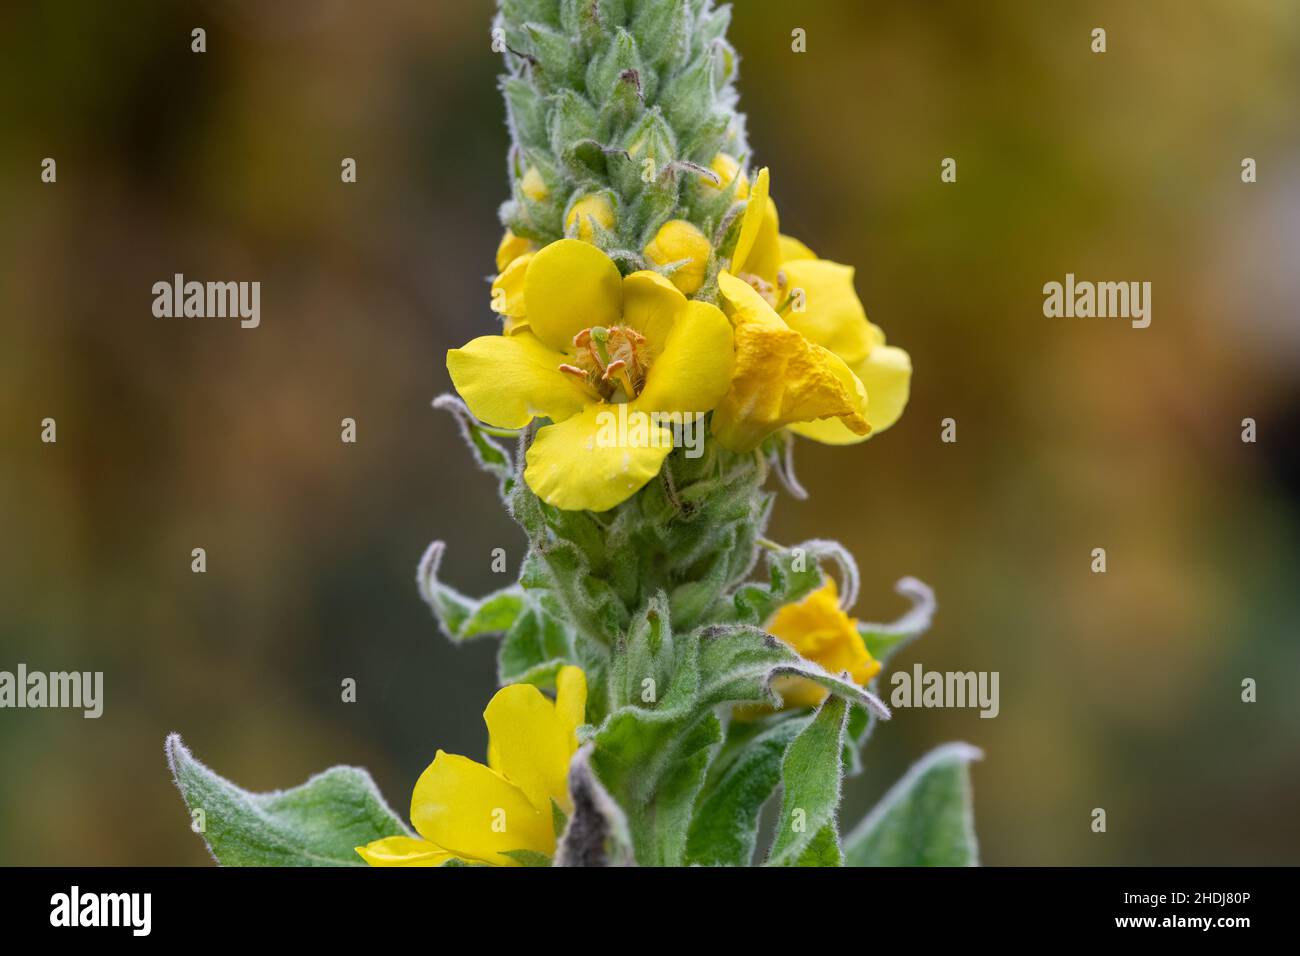 Close up of a great mullein (verbascum thapsus) flower in bloom Stock Photo